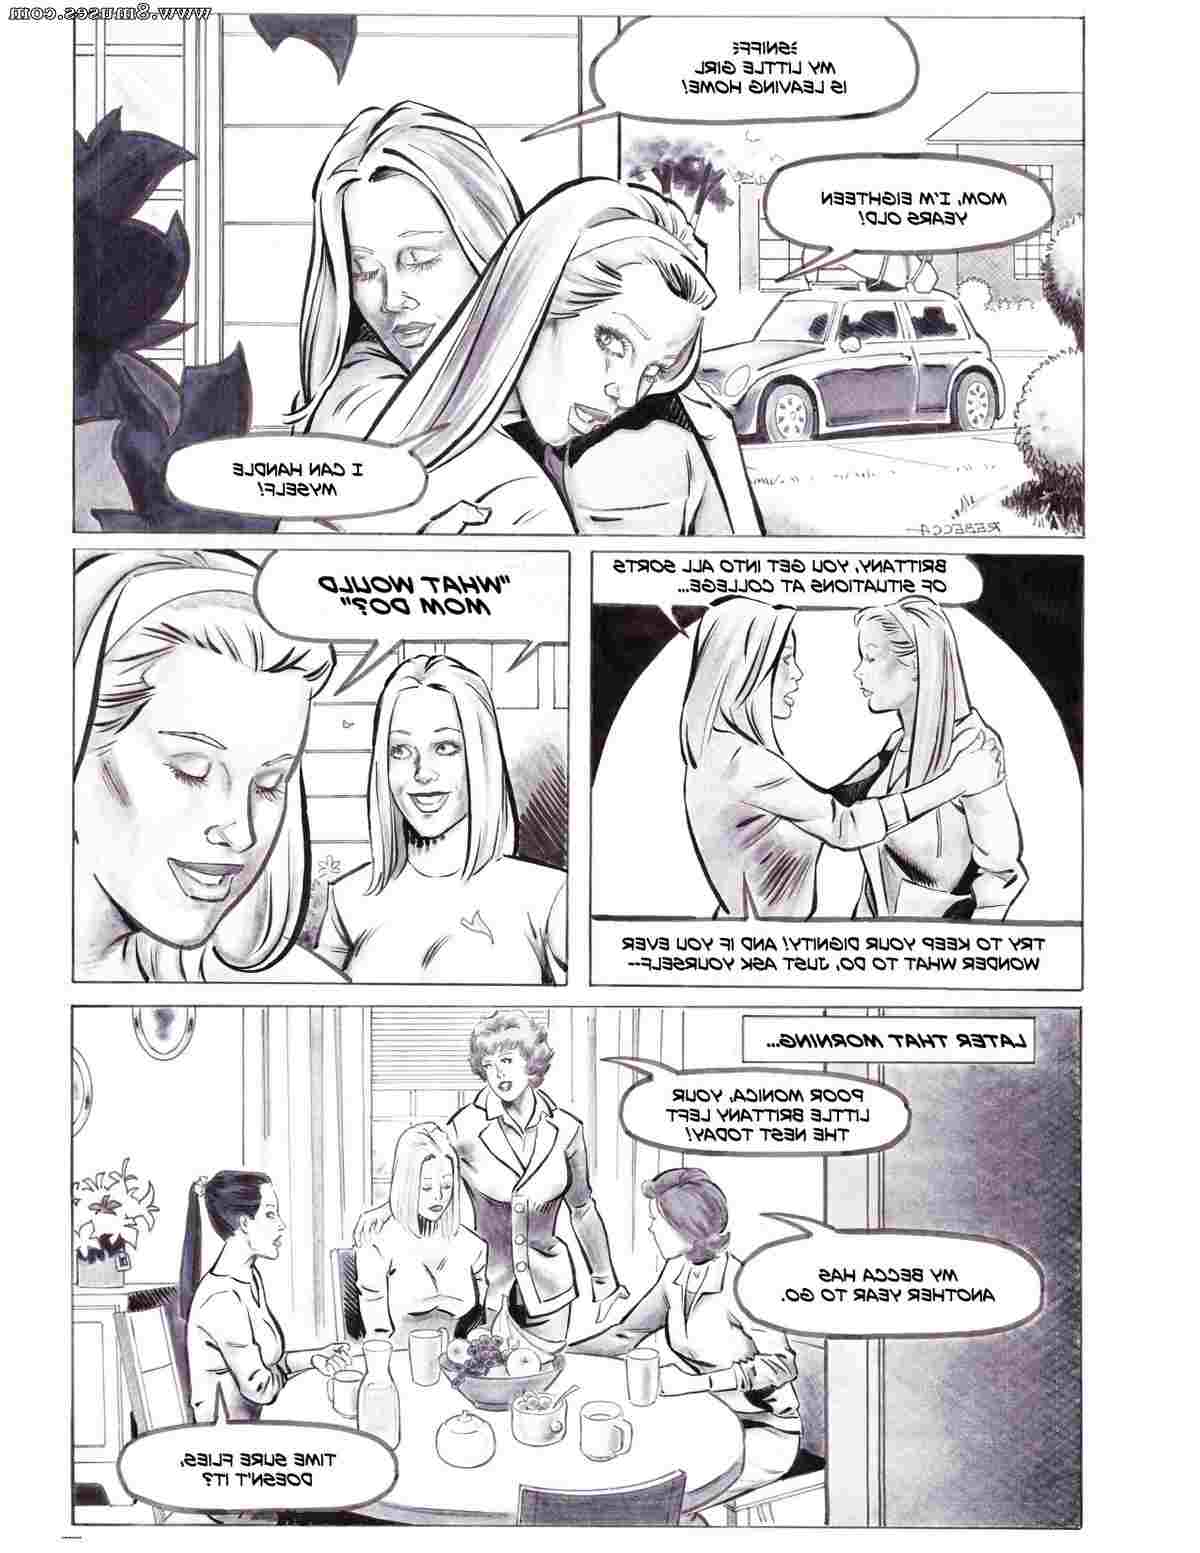 DreamTales-Comics/College-Bound College_Bound__8muses_-_Sex_and_Porn_Comics_2.jpg